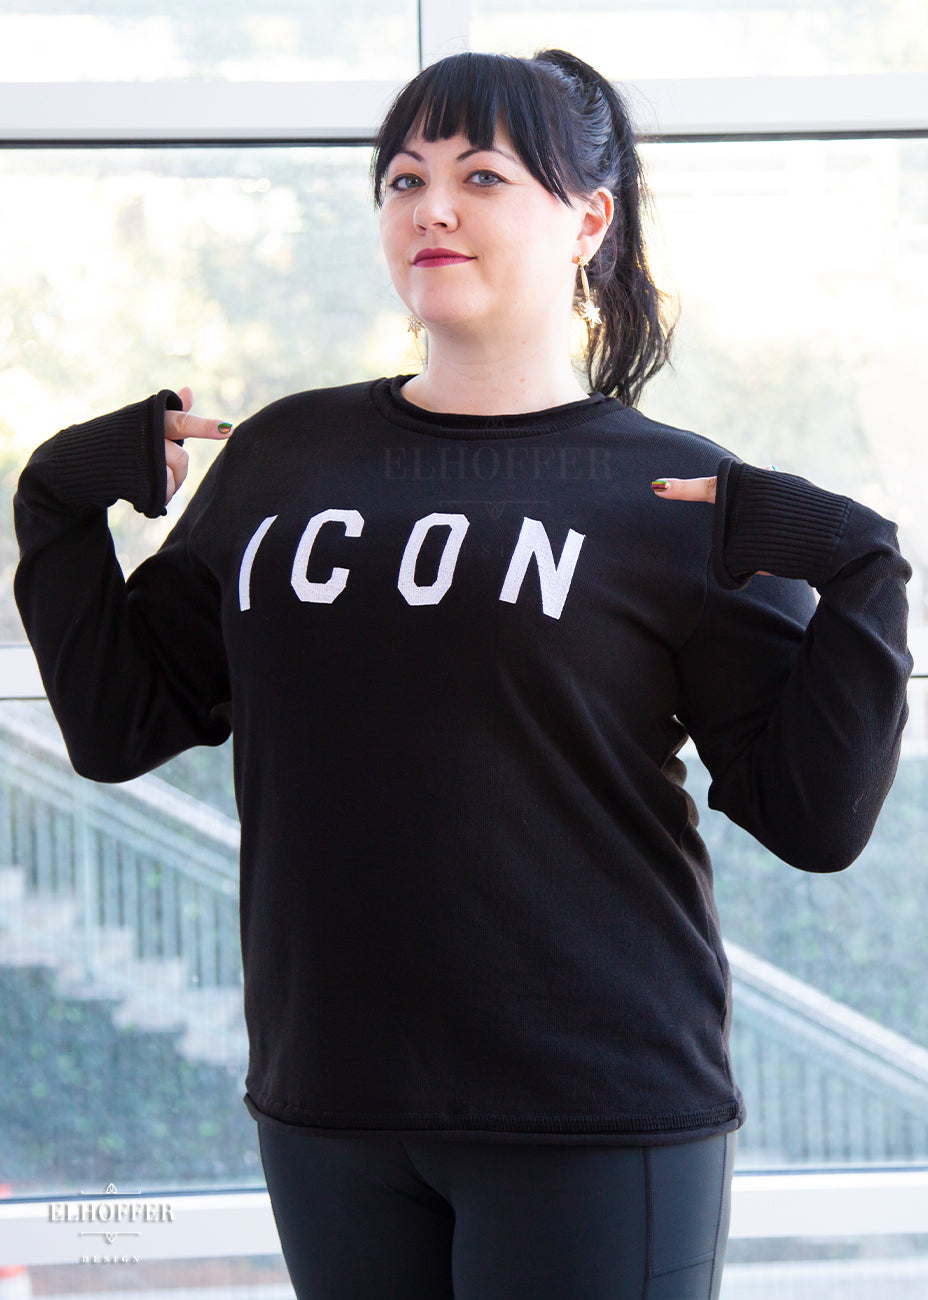 Bernadette, a fair skinned L model with long dark brown hair pulled up in a pony tail and bangs, is wearing an XL sample of black unisex sweater with white bold embroidered letters that spell ICON and has long sleeves with thumbholes. The sweater also has a rolled hem on both the neckline and around the cuffs. The XL sample makes the sweater look like a relaxed fit, she would get her normal L size if she wanted it more fitted.